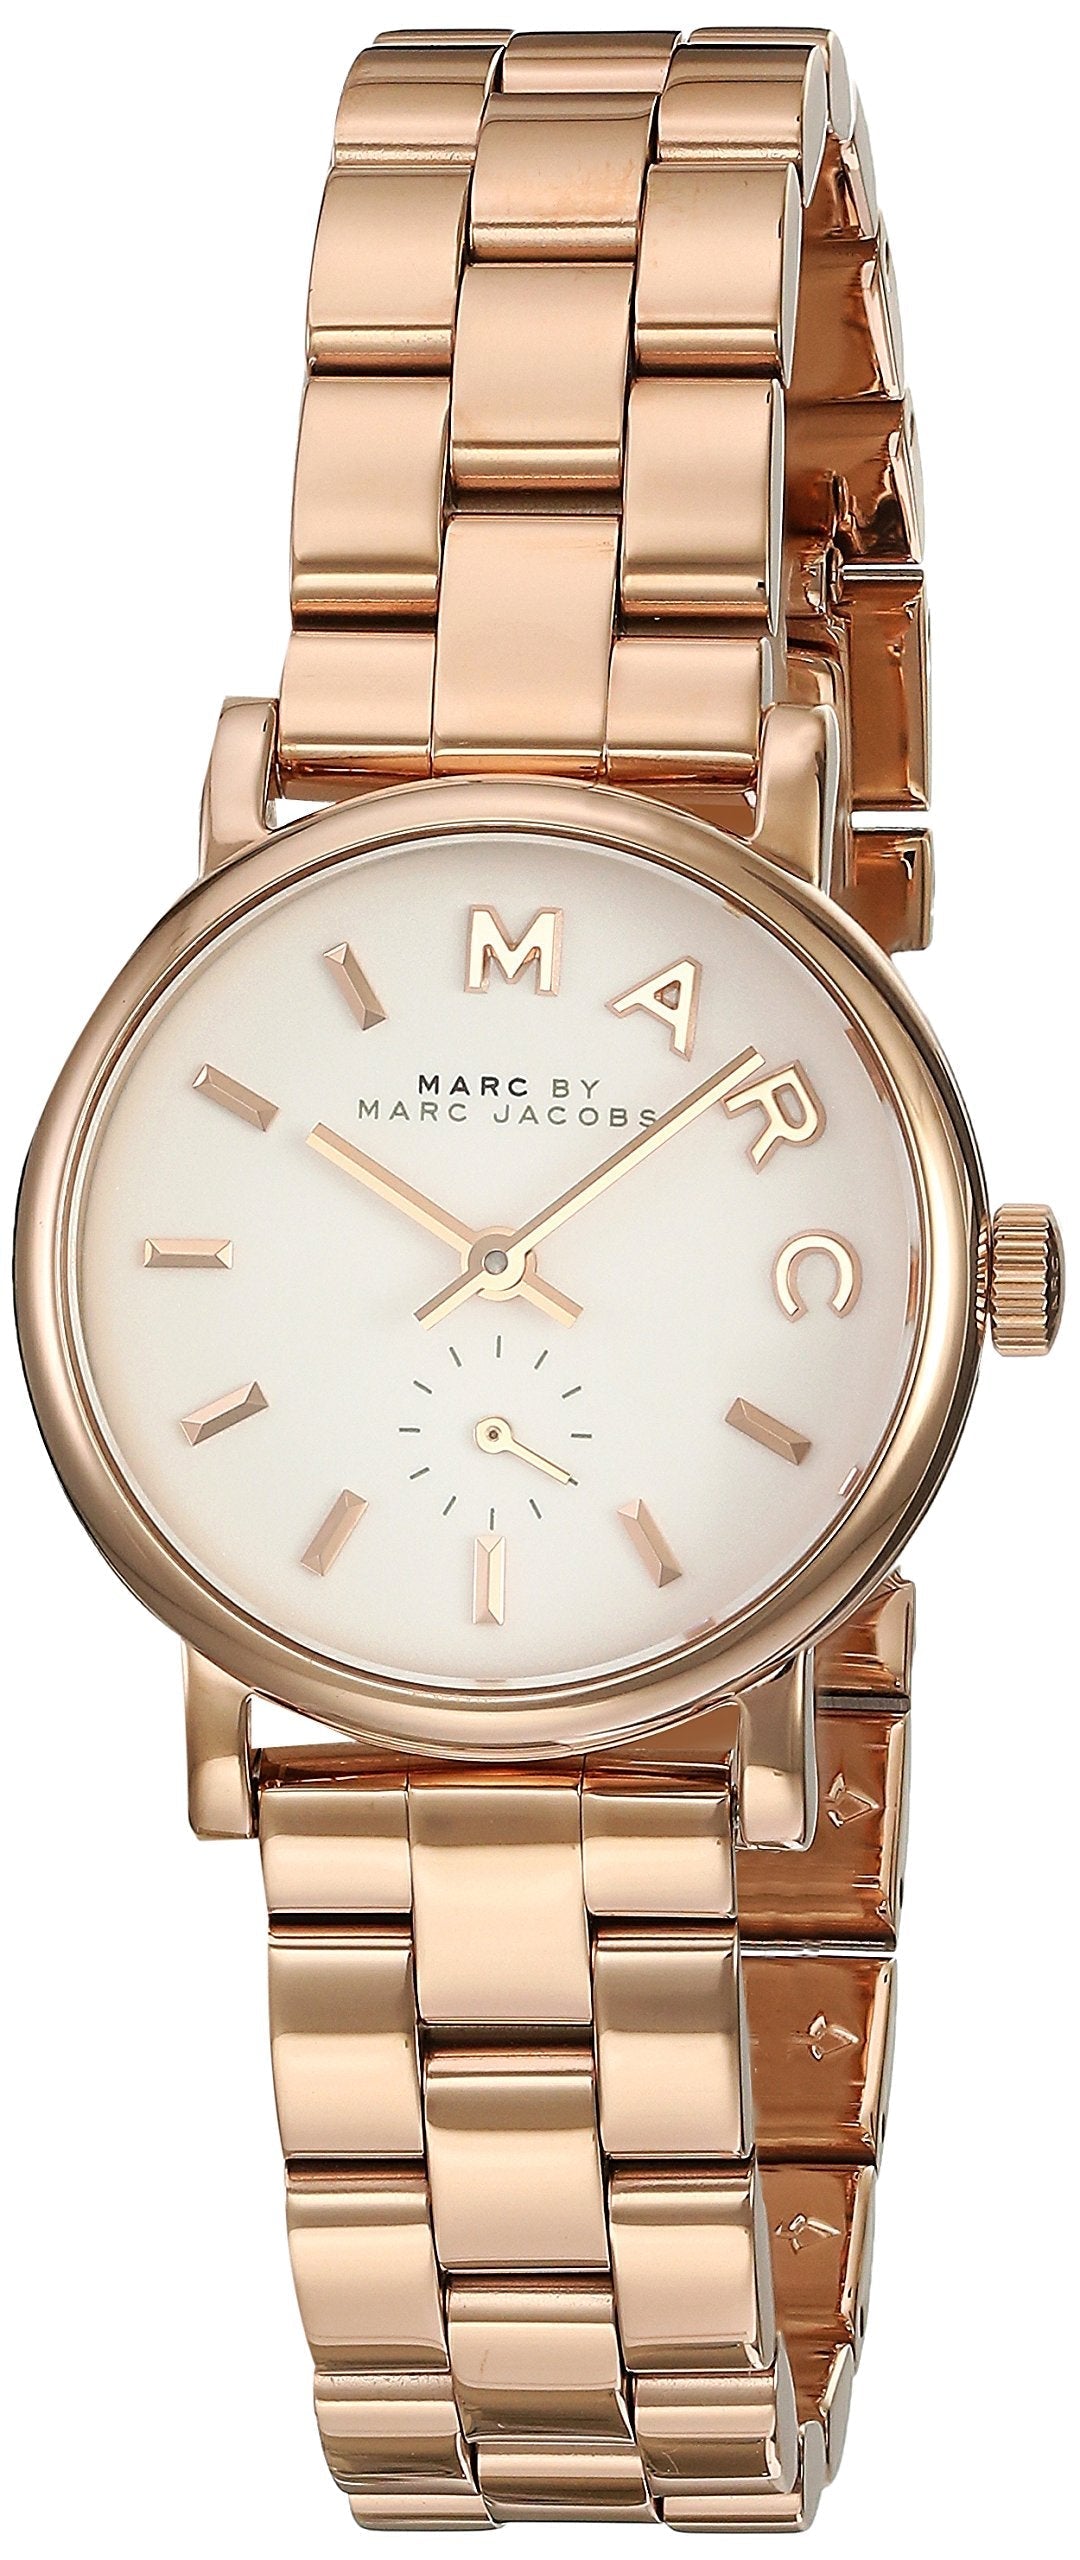 Marc Jacobs Marc Baker White Dial Rose Gold Stainless Steel Watch for Women - MBM3248